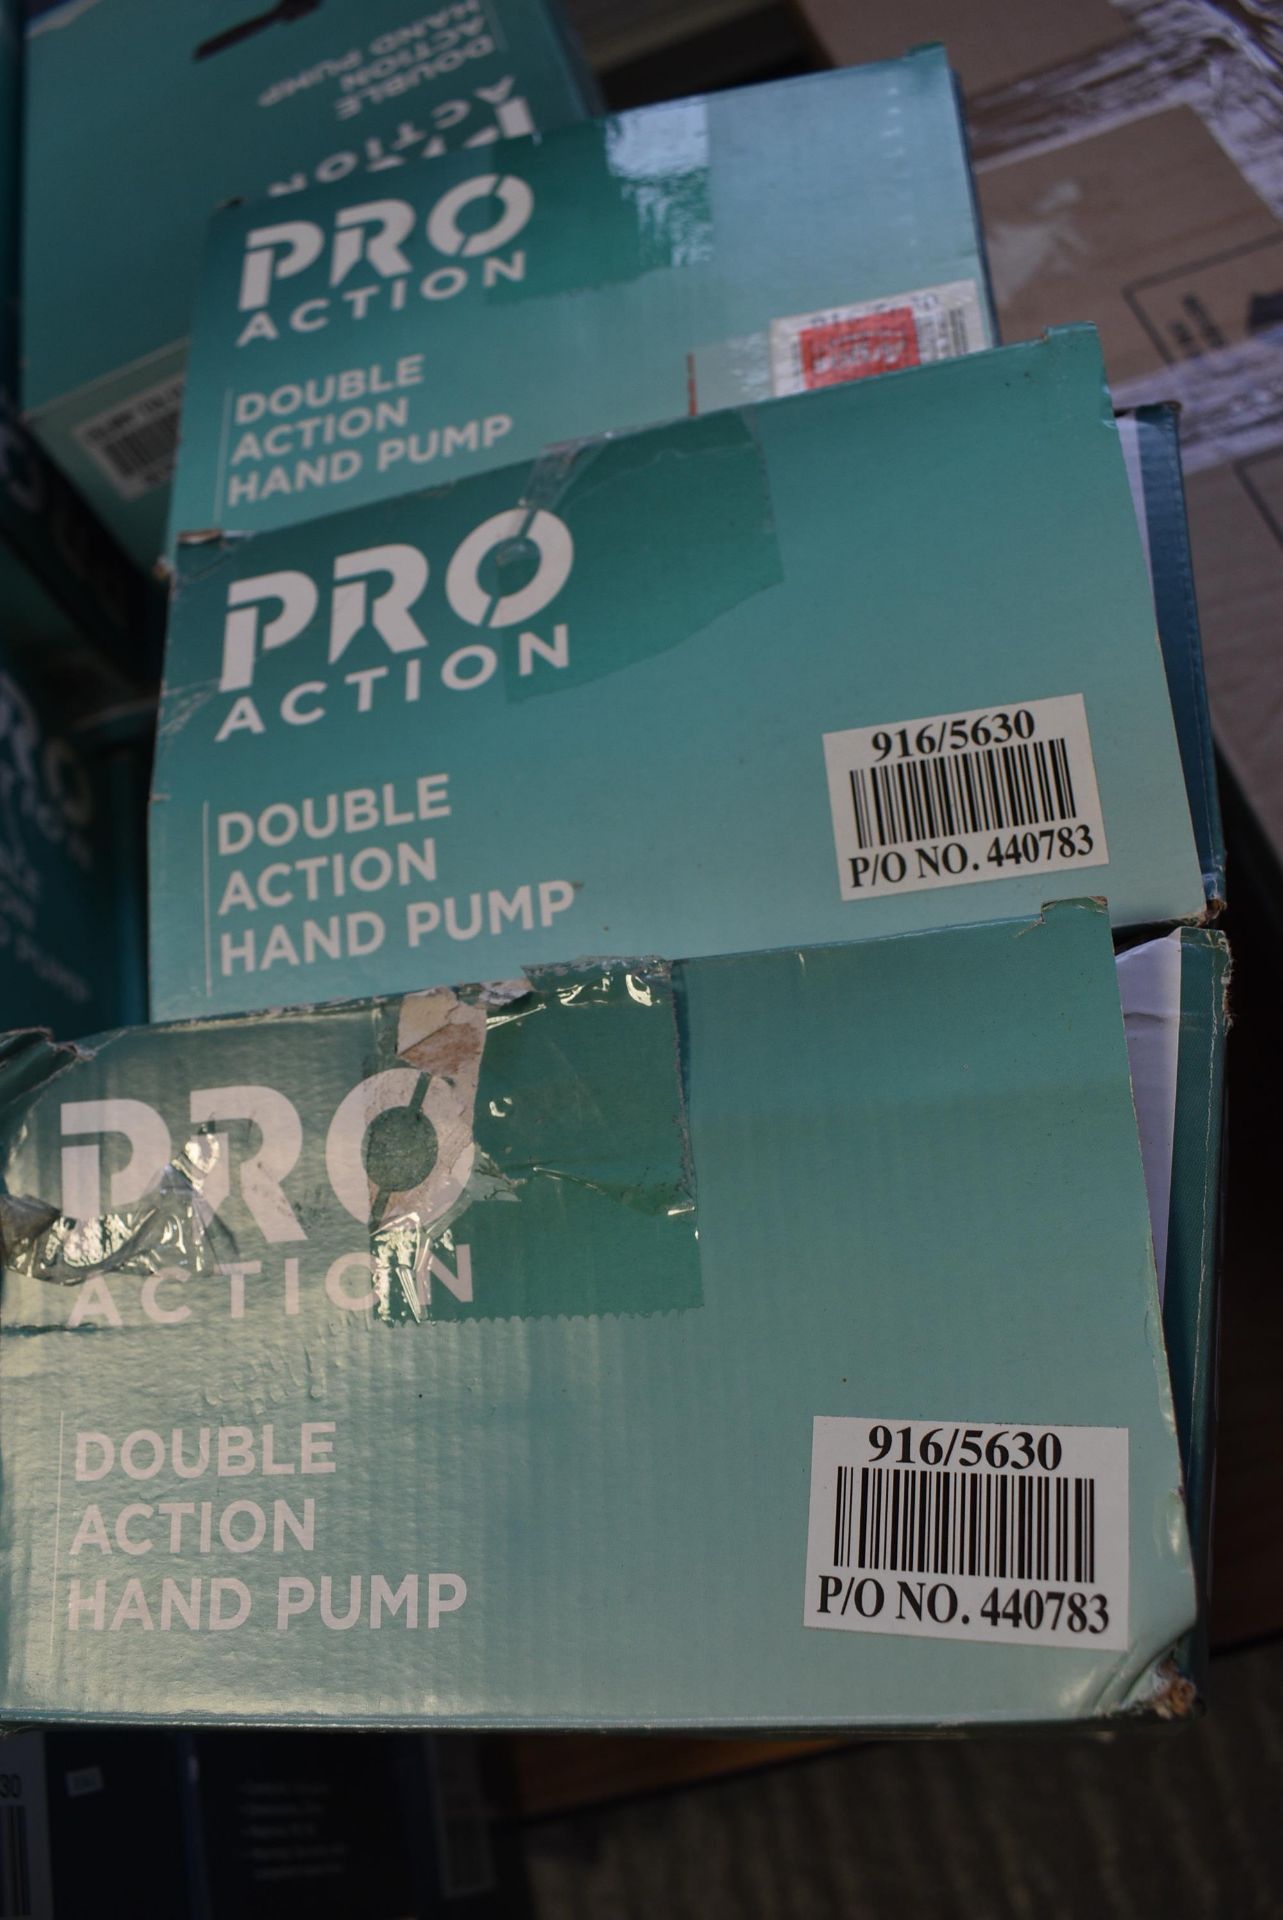 Three Pro Action Double Action Hand Pumps - Image 2 of 2